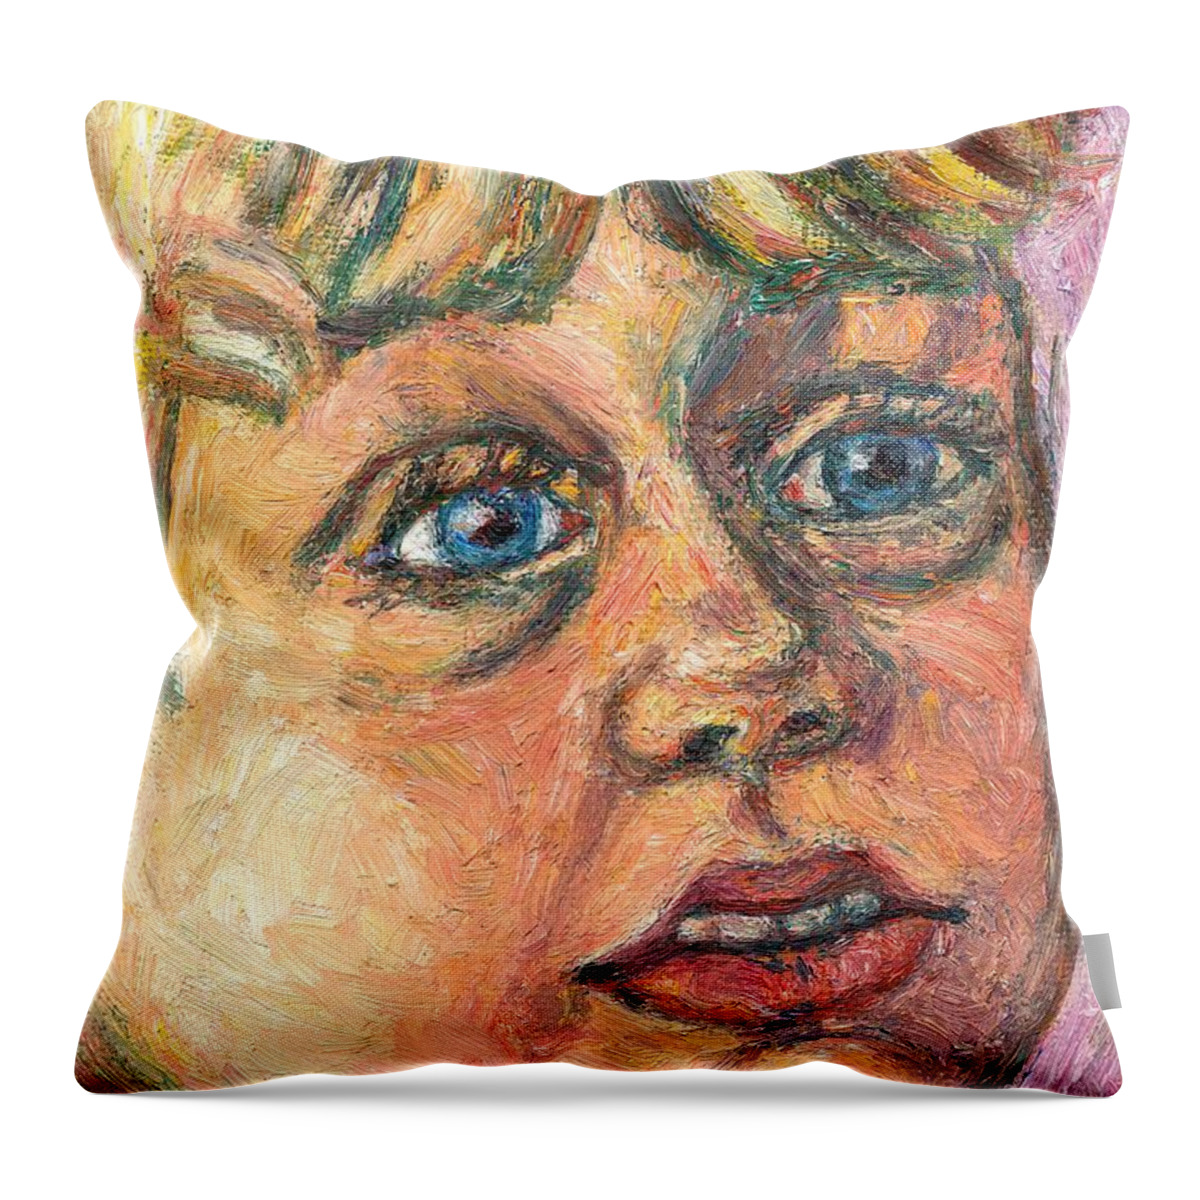 Portrait Throw Pillow featuring the painting Wonder by Kendall Kessler